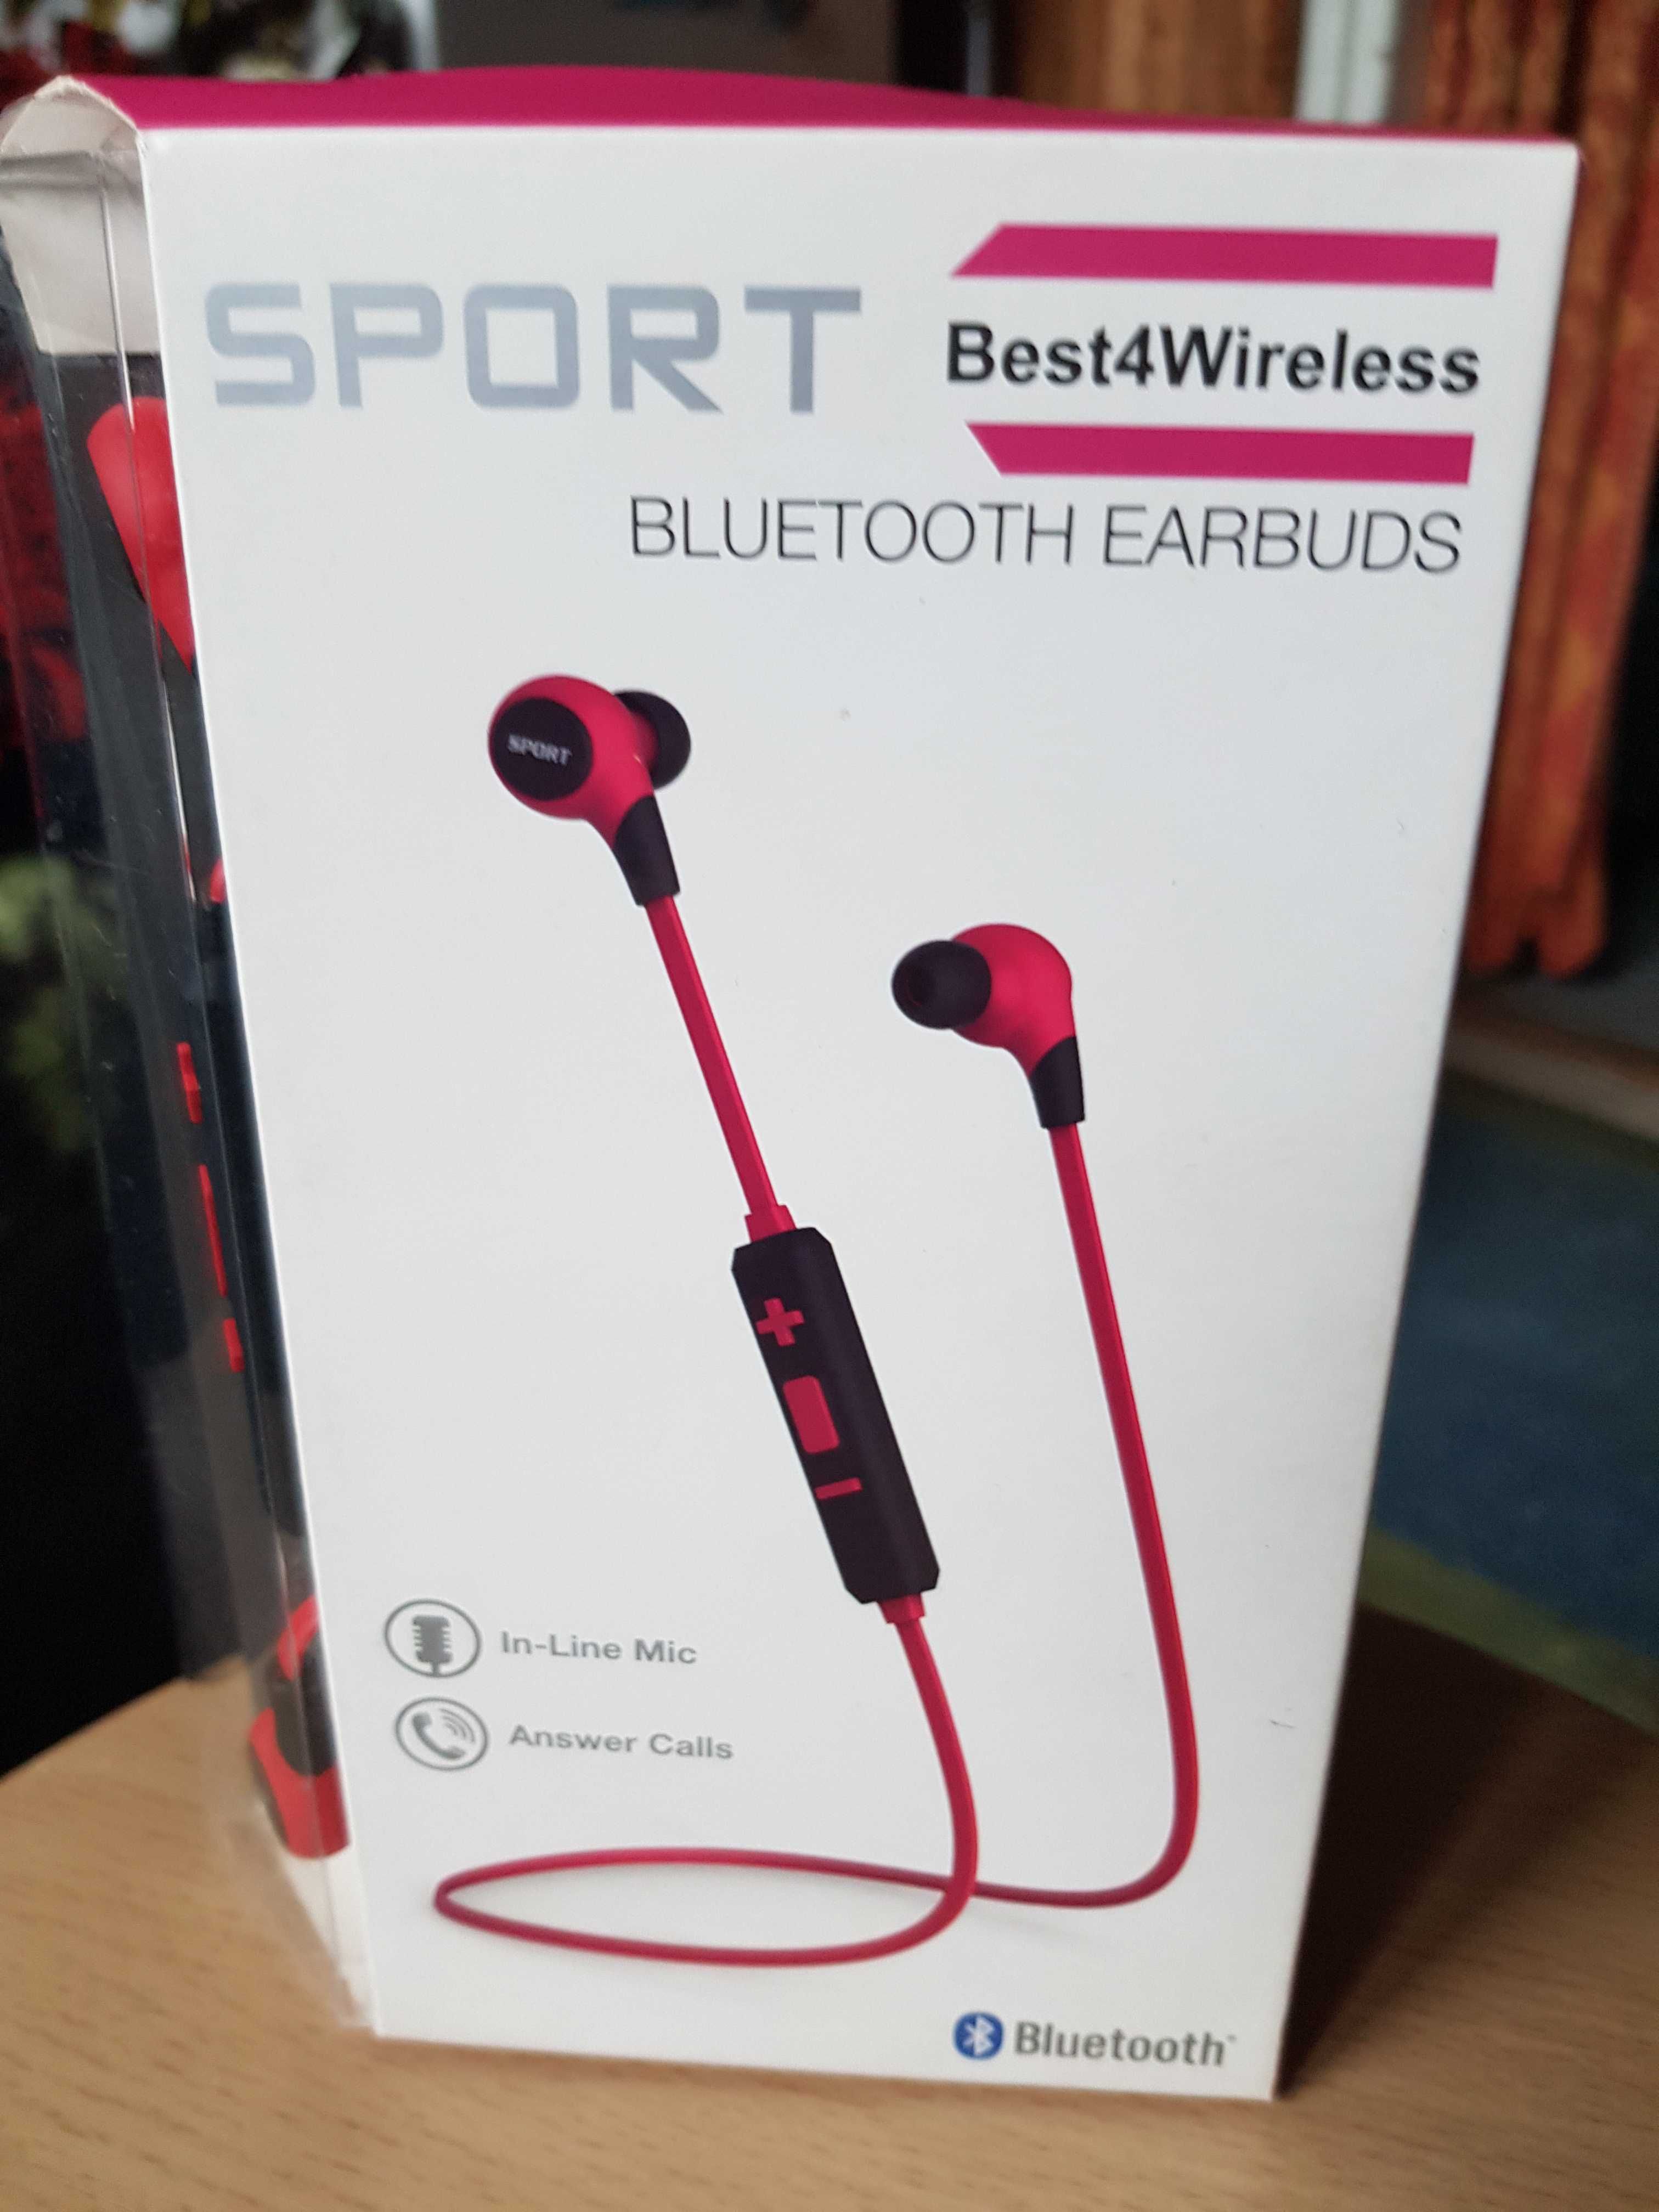 Bluetooth earbuds for workout and gim Best4Wireless